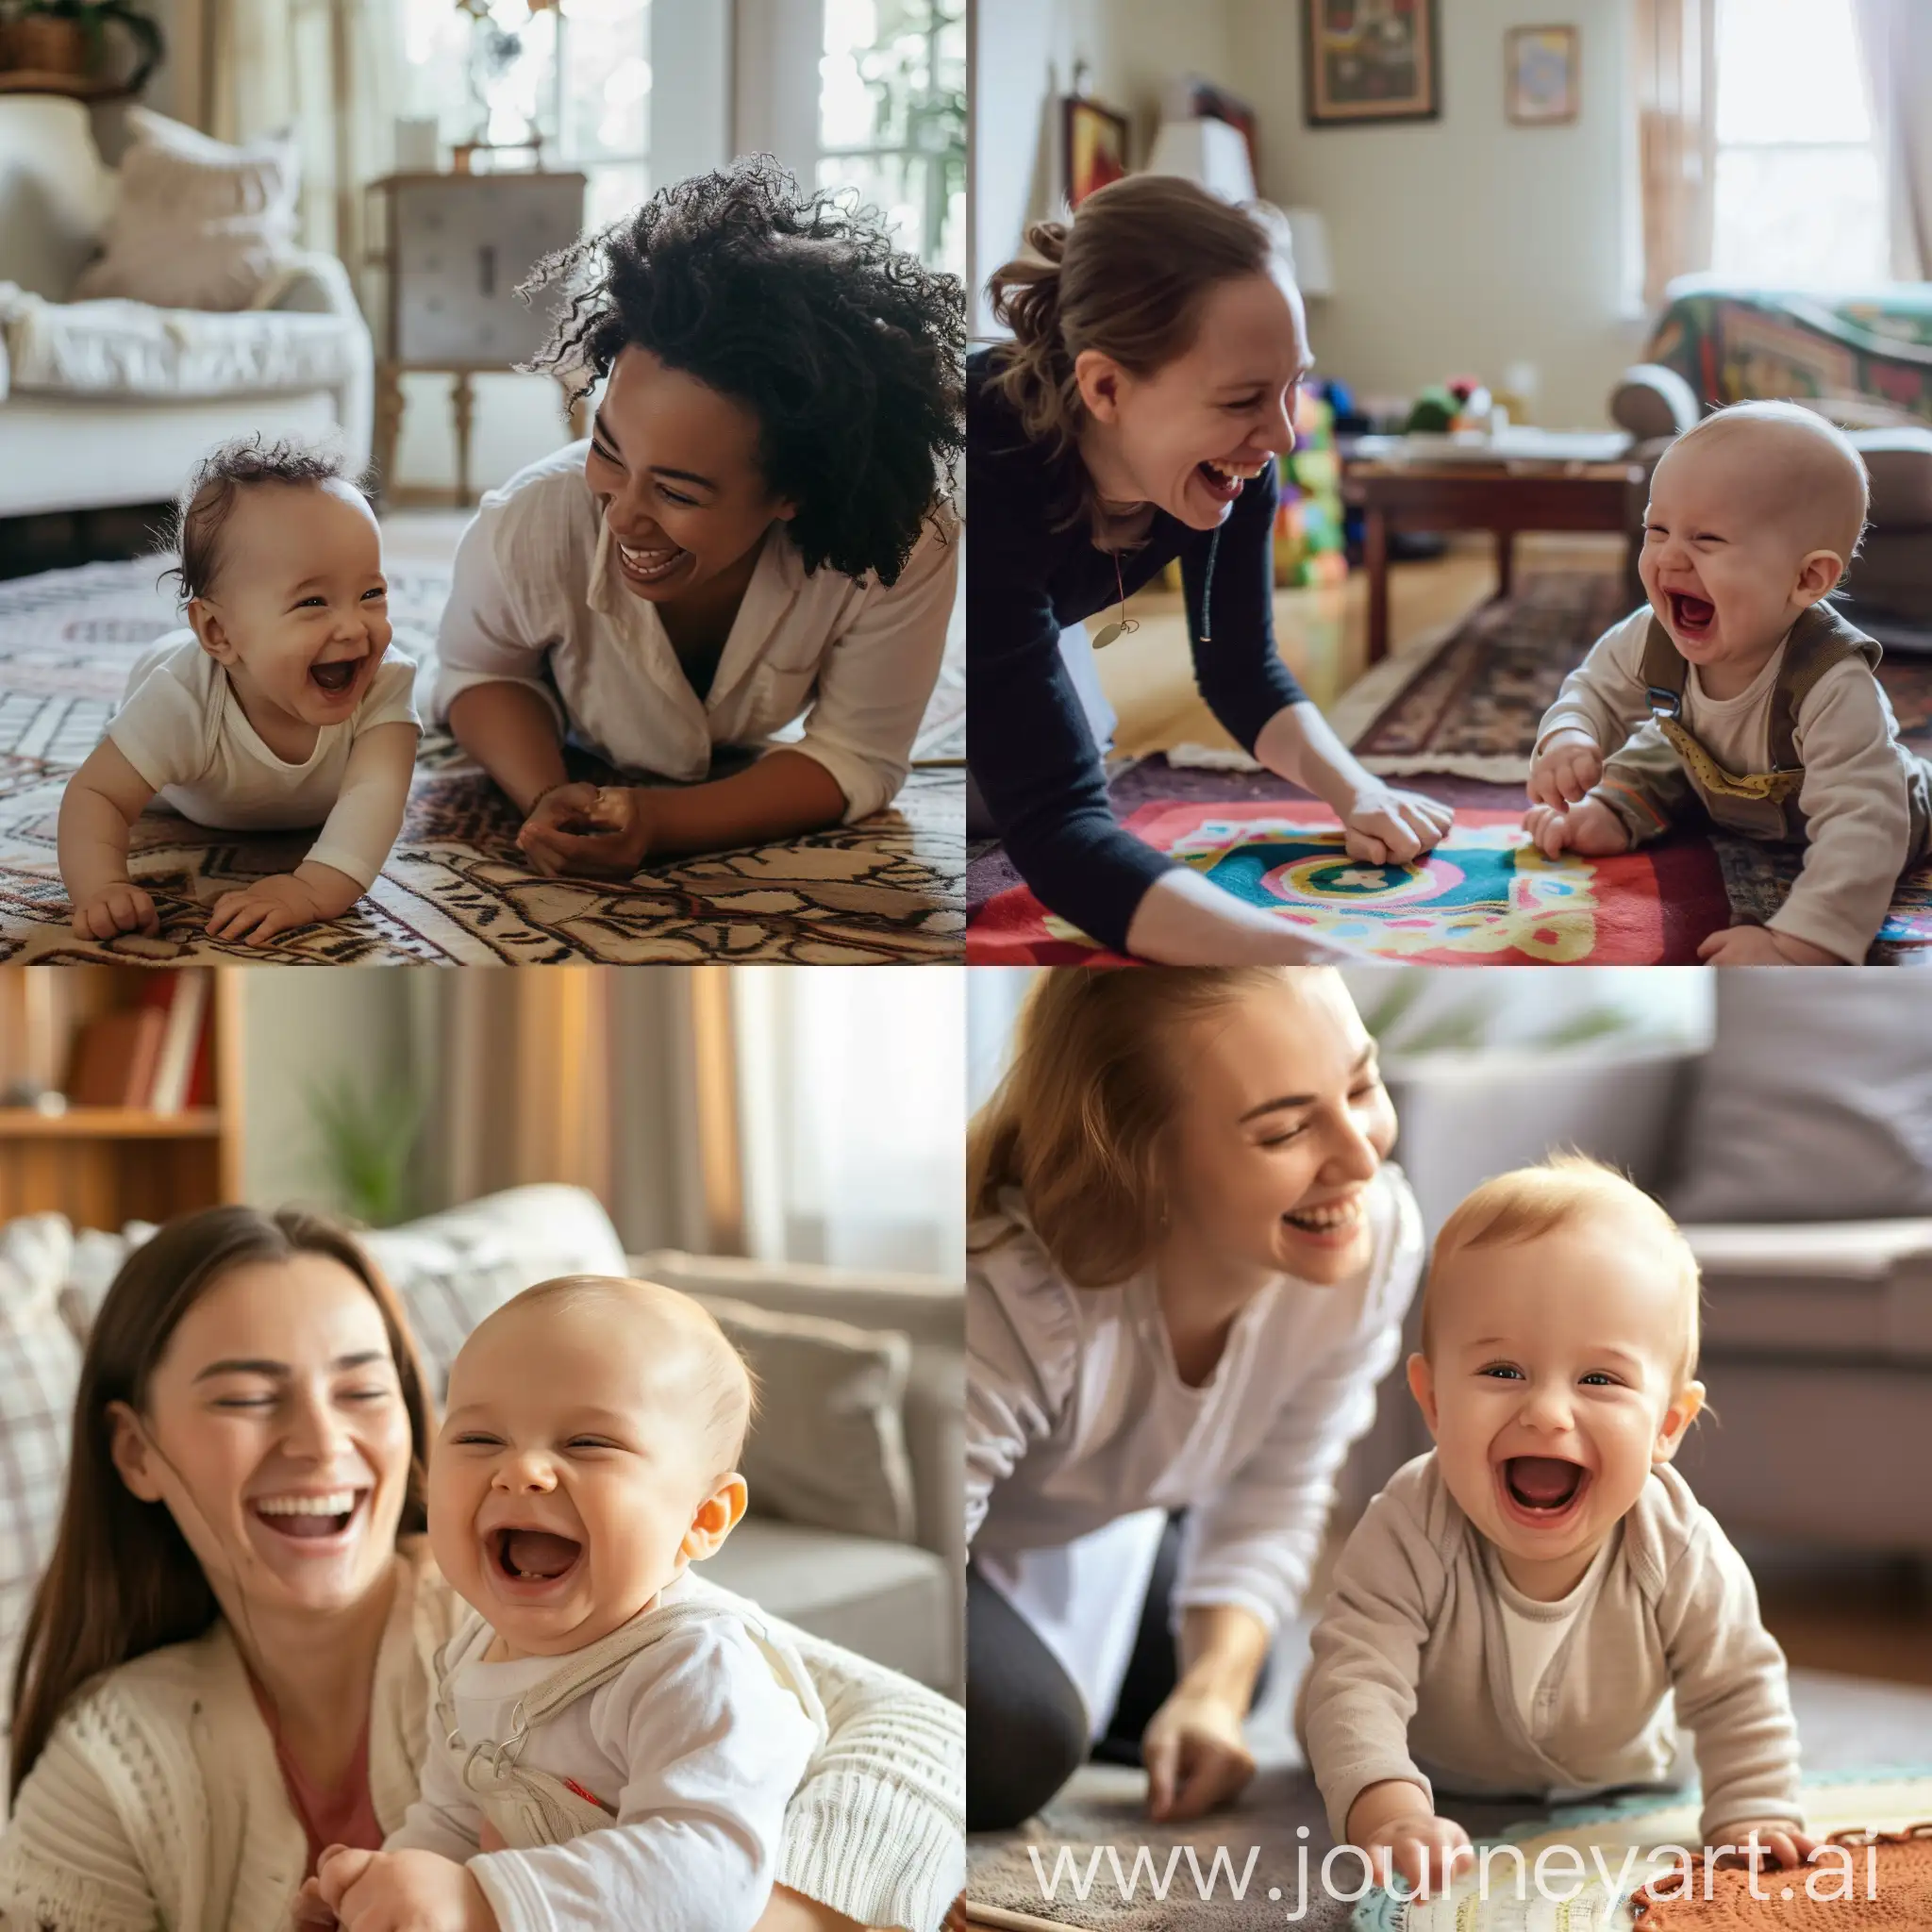 A nanny is seen playing with a baby in a living room. The nanny is smiling and the baby is laughing.
